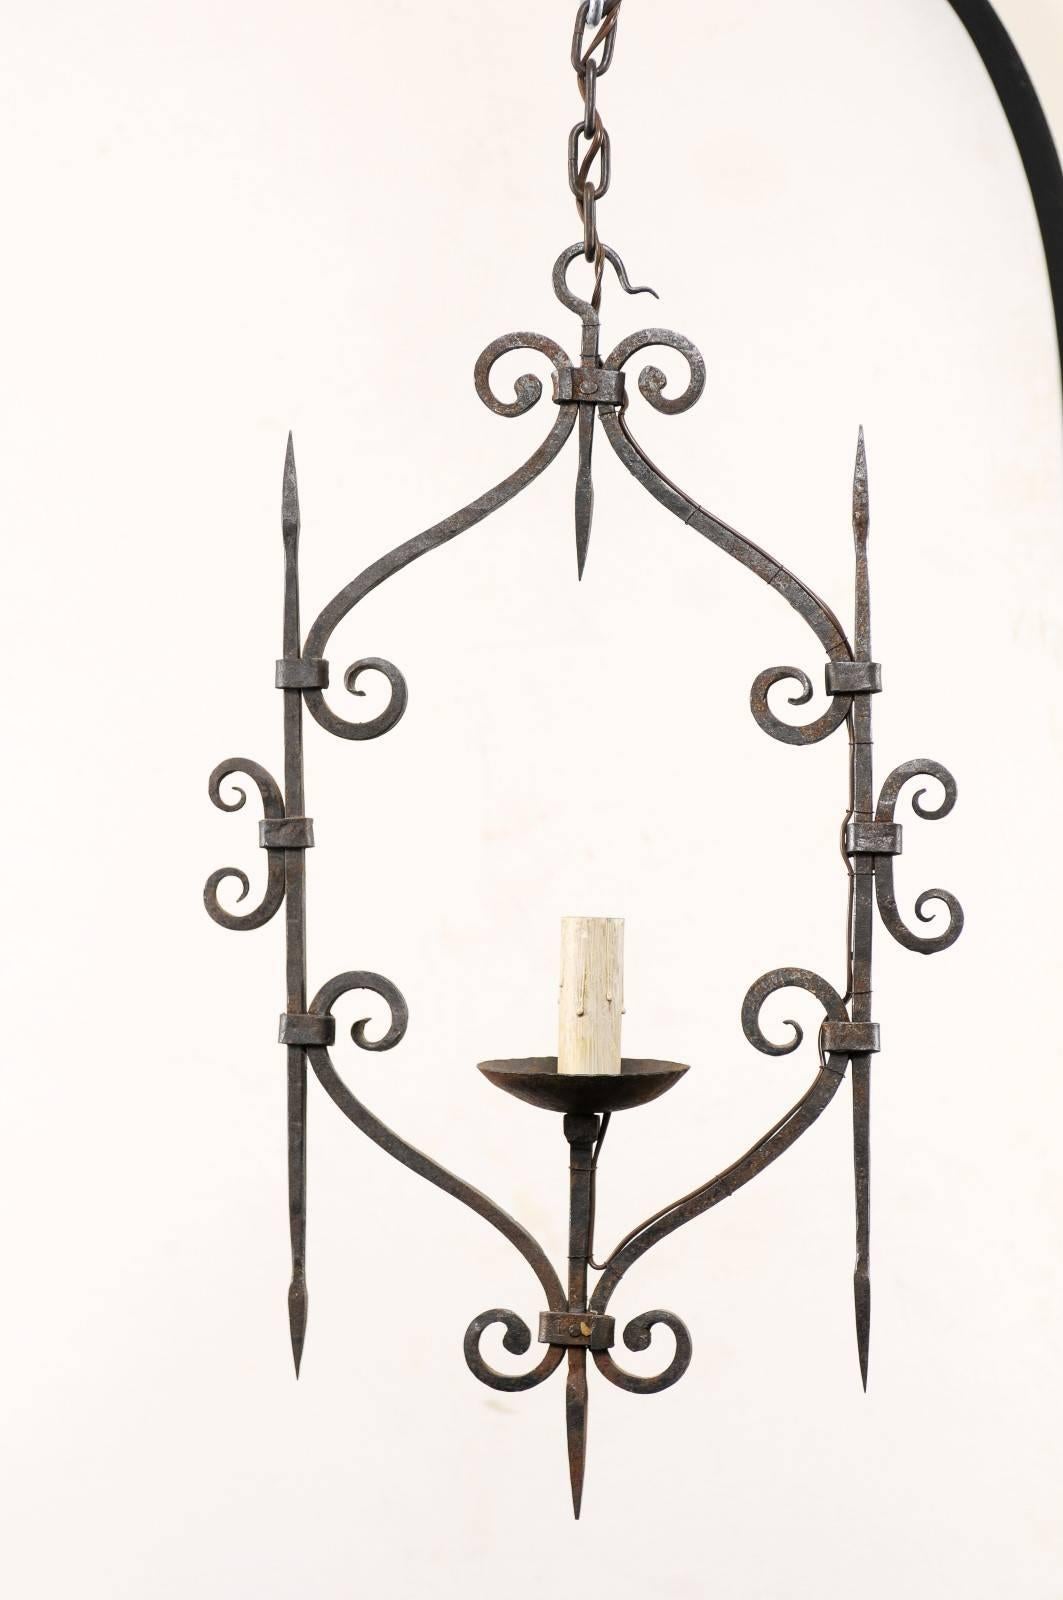 A French single light iron chandelier from the mid-20th century. This French vintage light fixture features a single light in its centre, framed sweetly between two lateral spires. The chandelier is decorated with hand-forged scroll details about